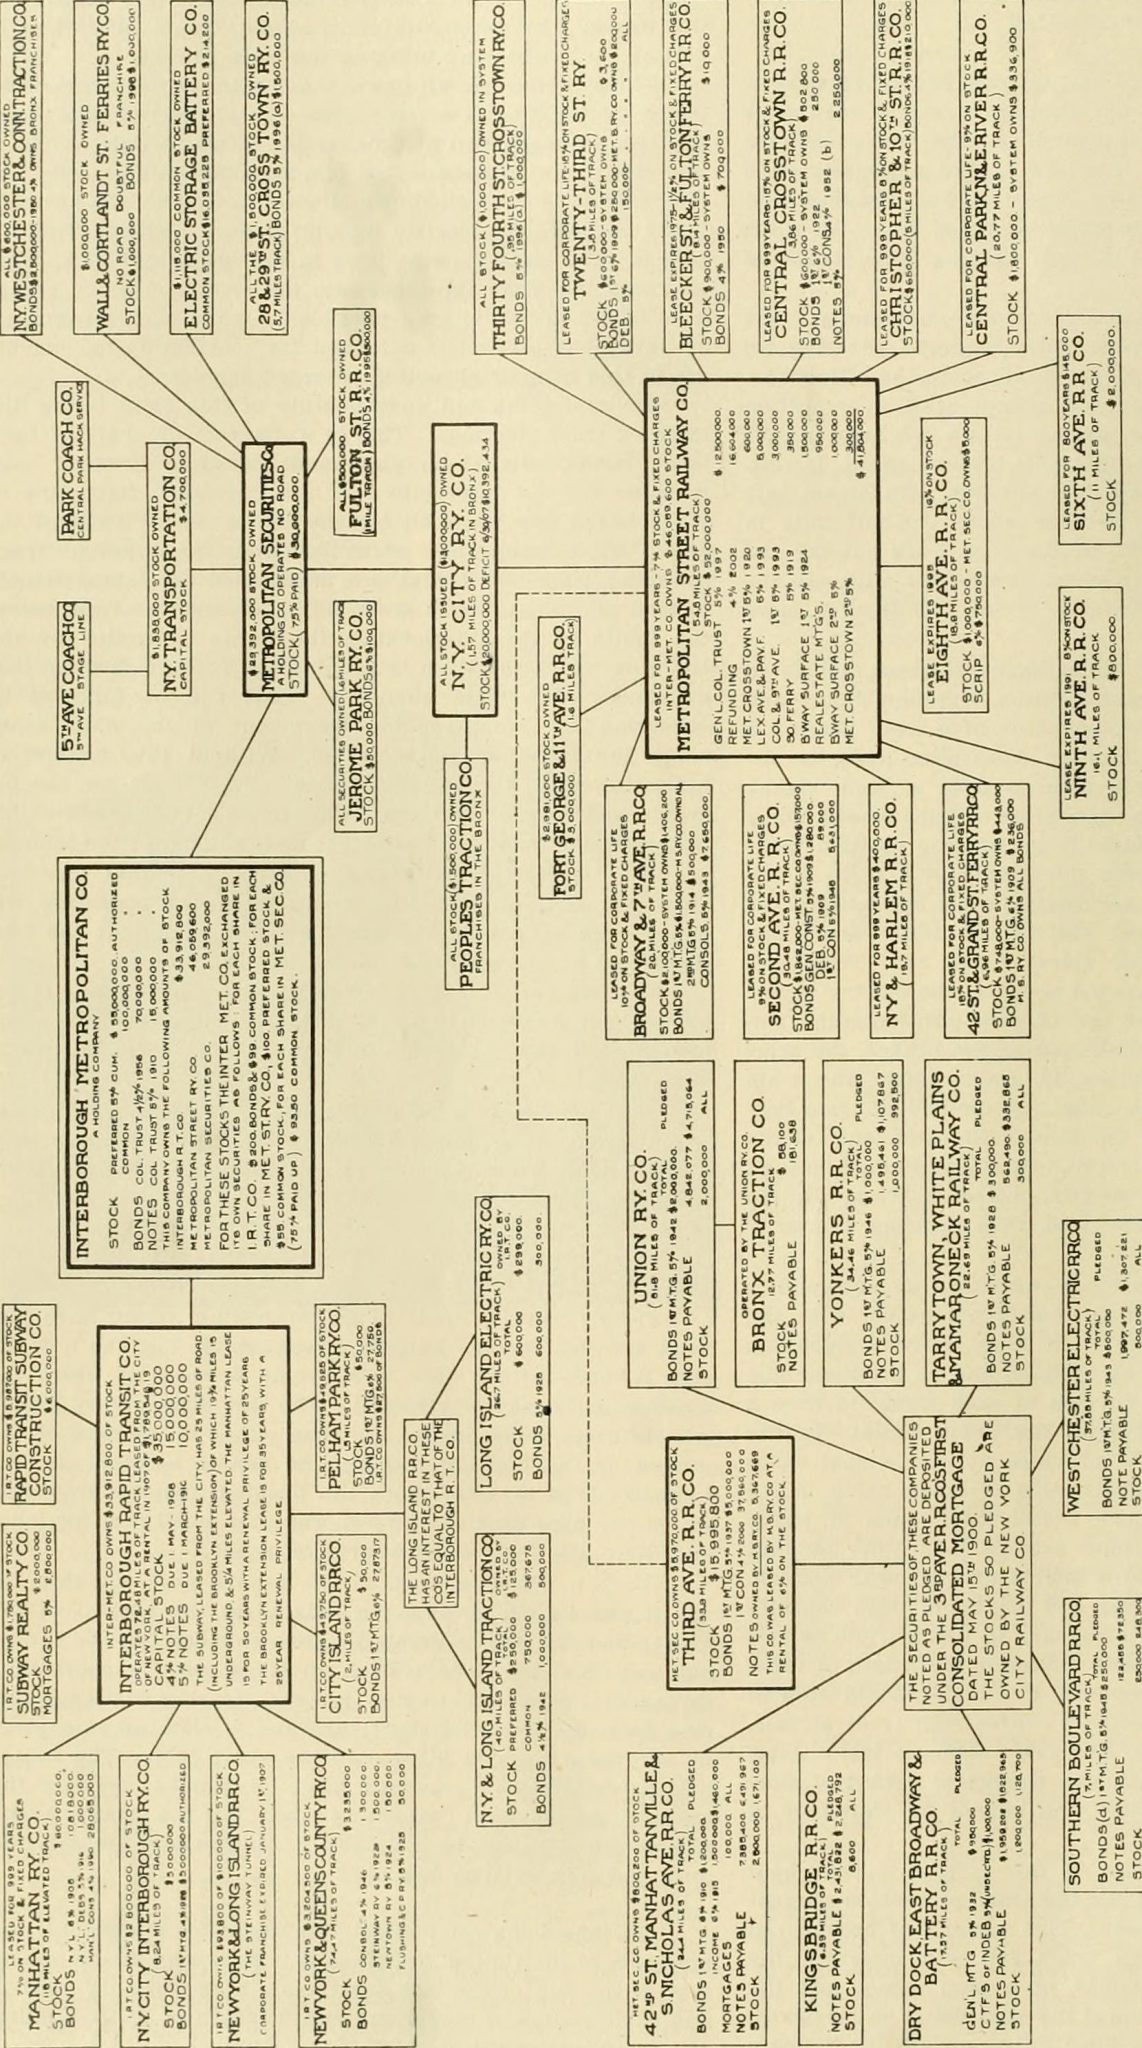 Image from page 617 of "Electric railway review" (1906)